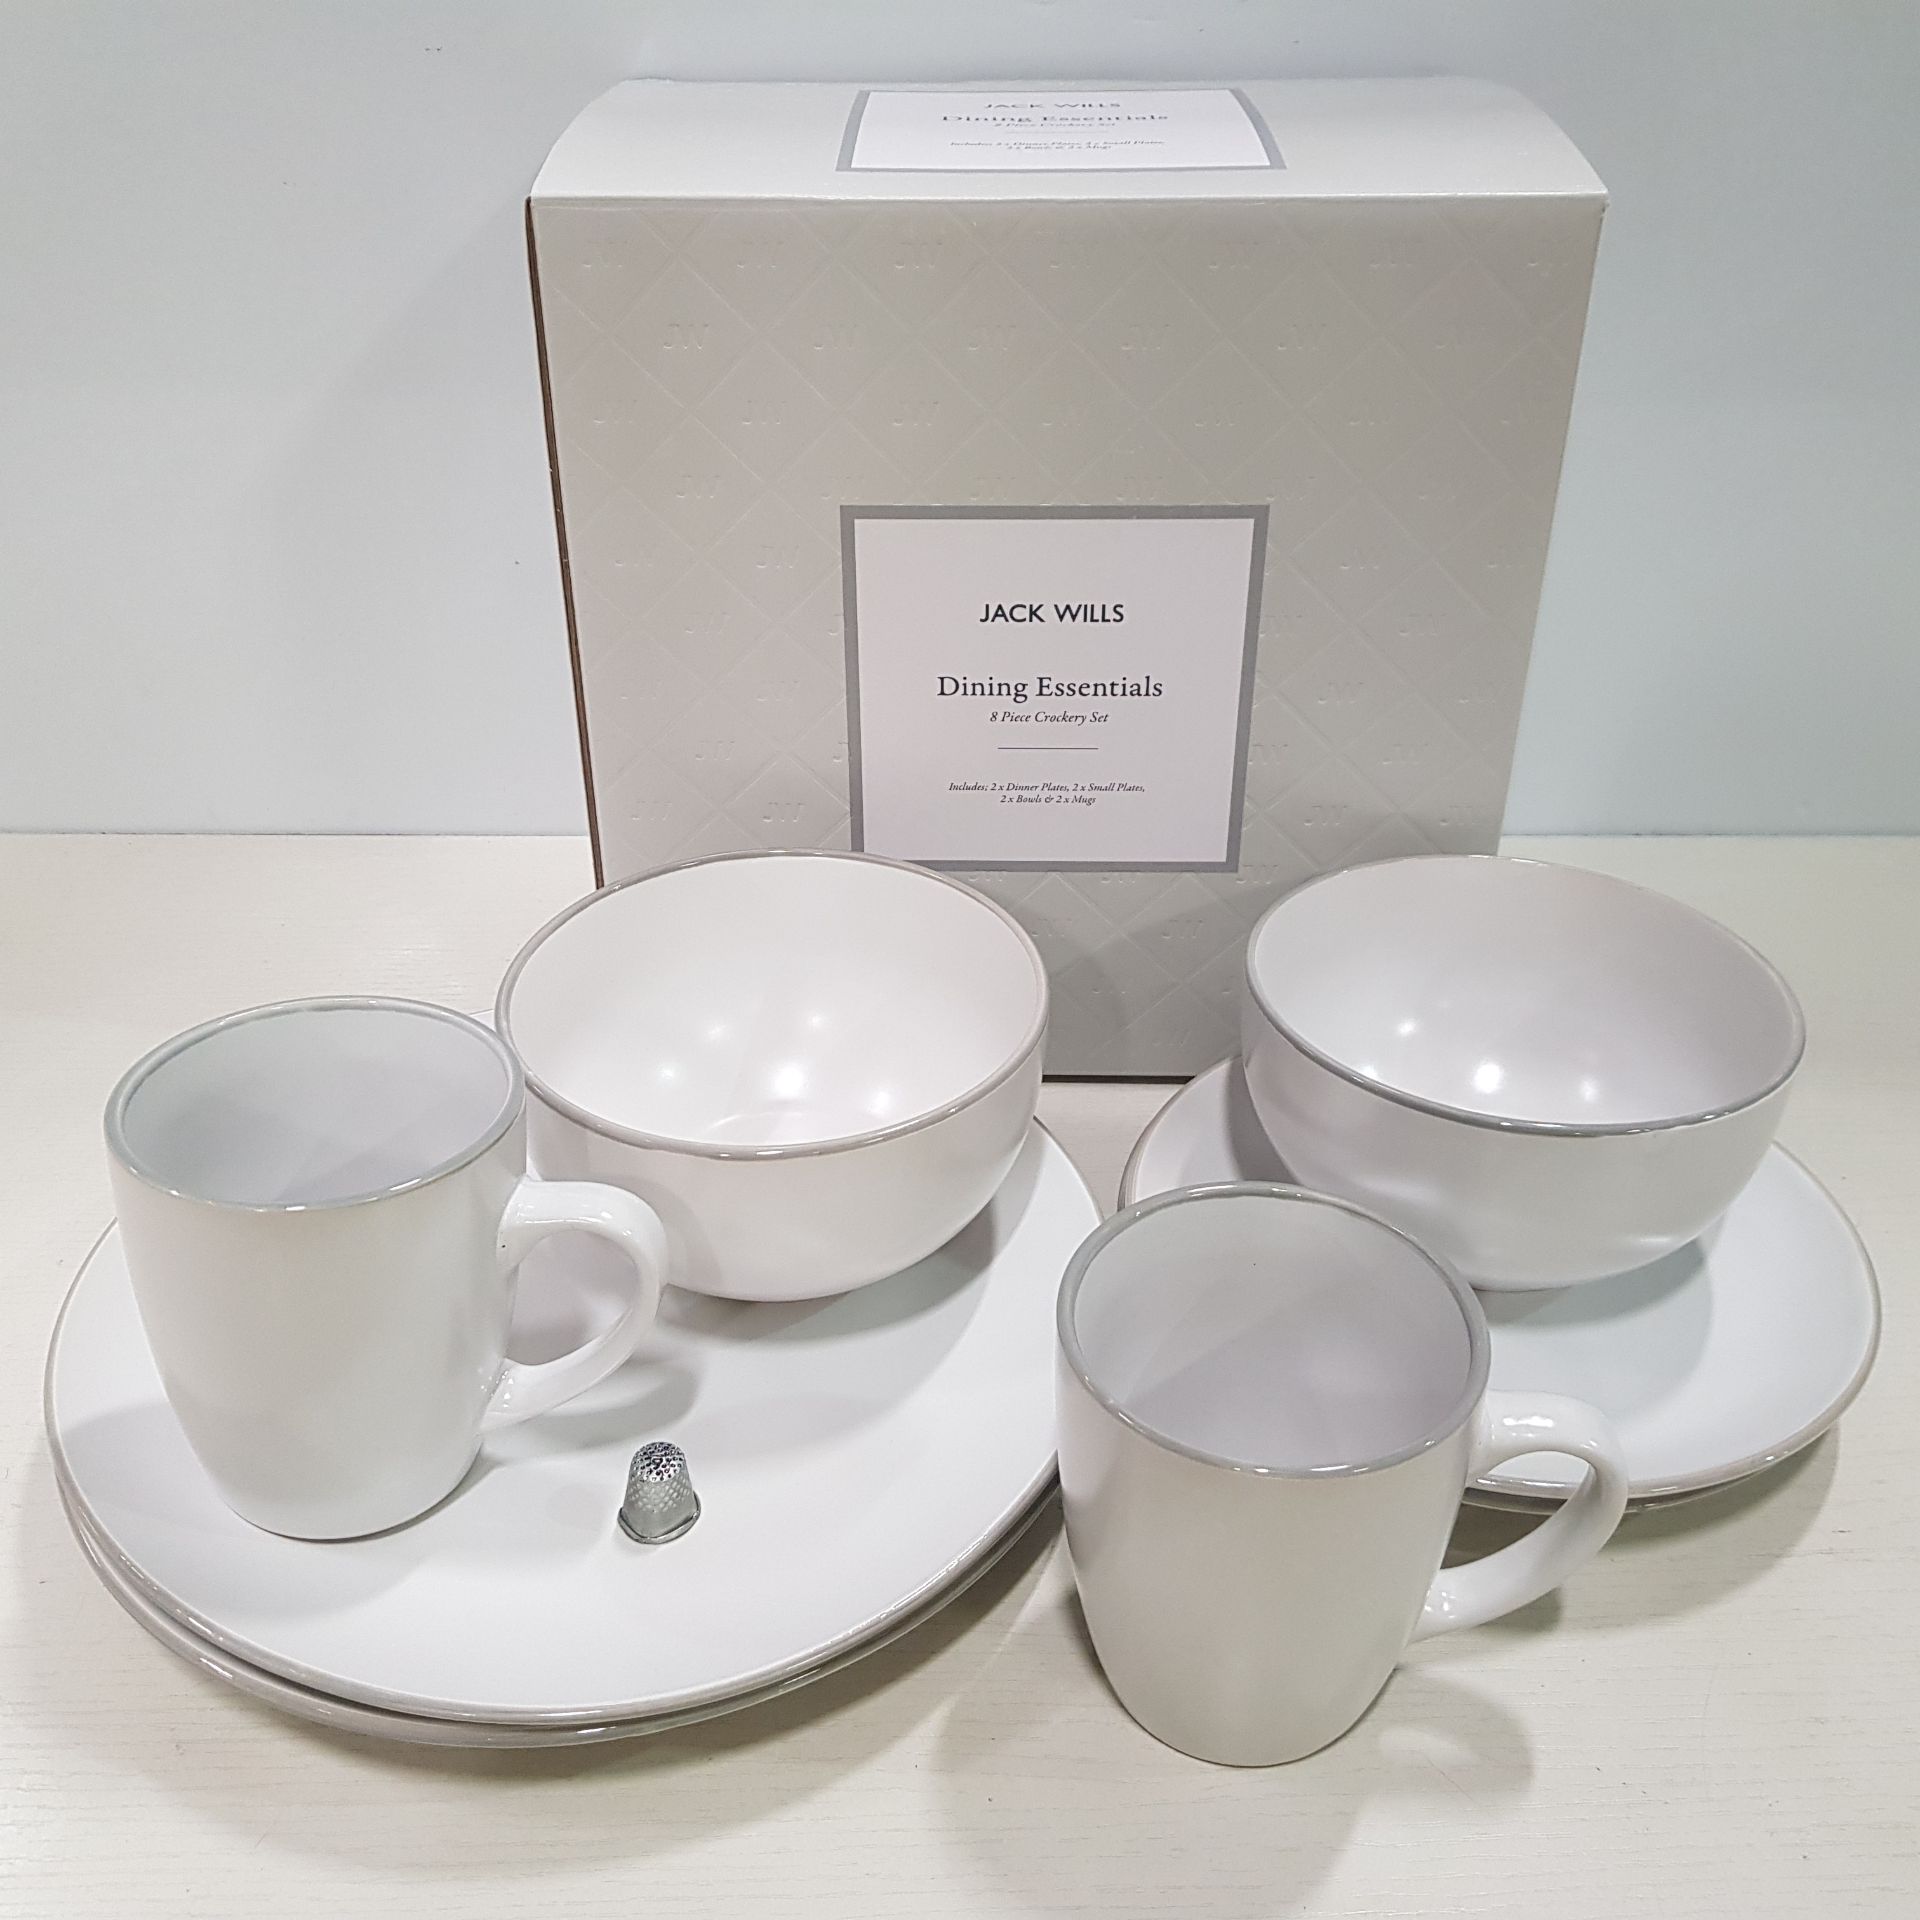 12 X BRAND NEW JACK WILLS BOXED DINING ESSENTIALS 8 PIECE CROCKERY SETS TO INCLUDE 2 X DINNER